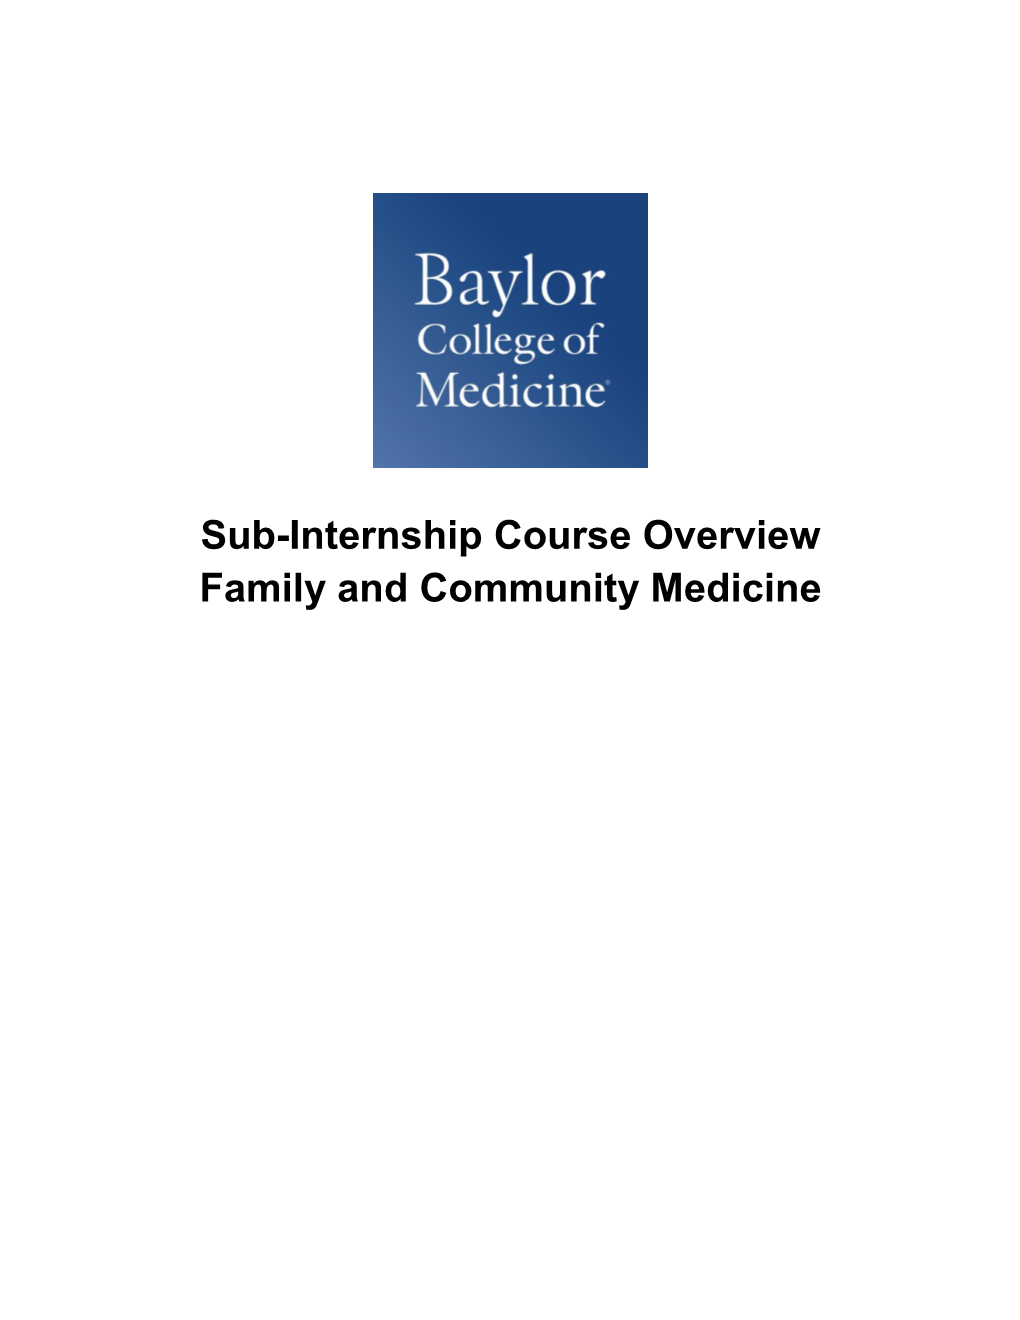 Sub-Internship Course Overview Family and Community Medicine